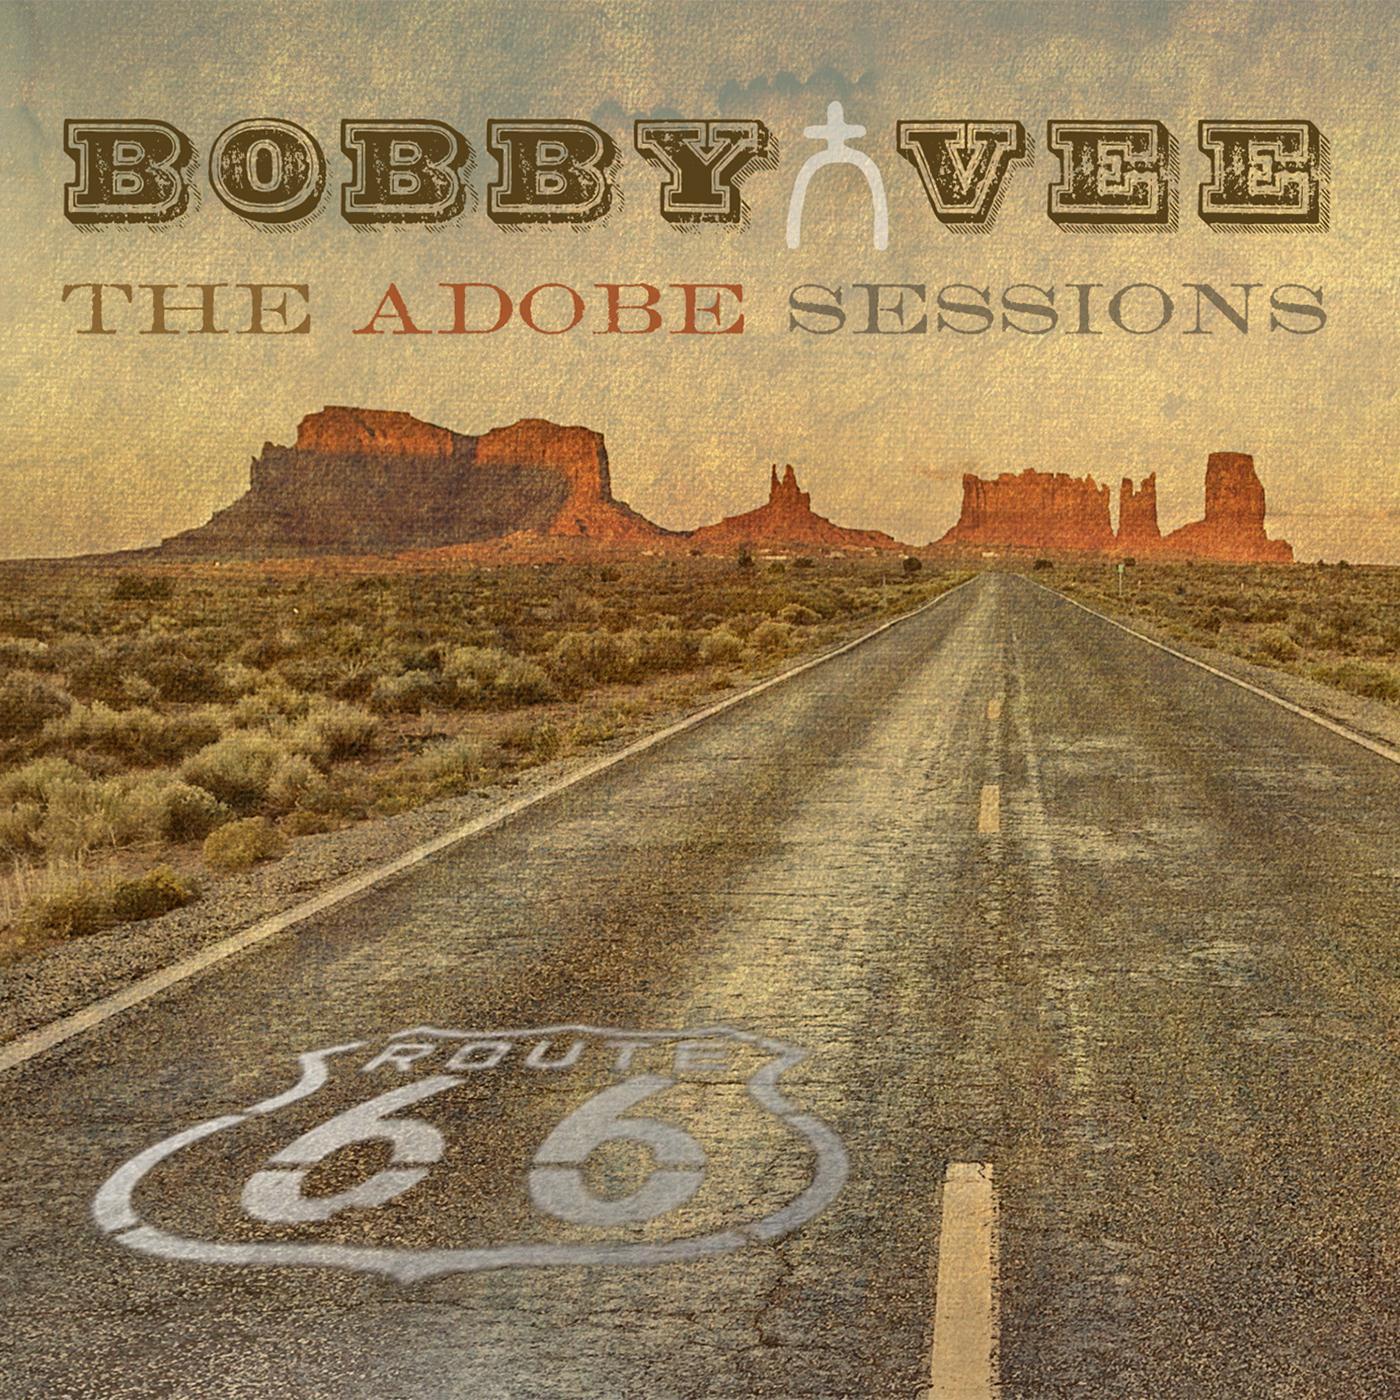 The Adobe Sessions